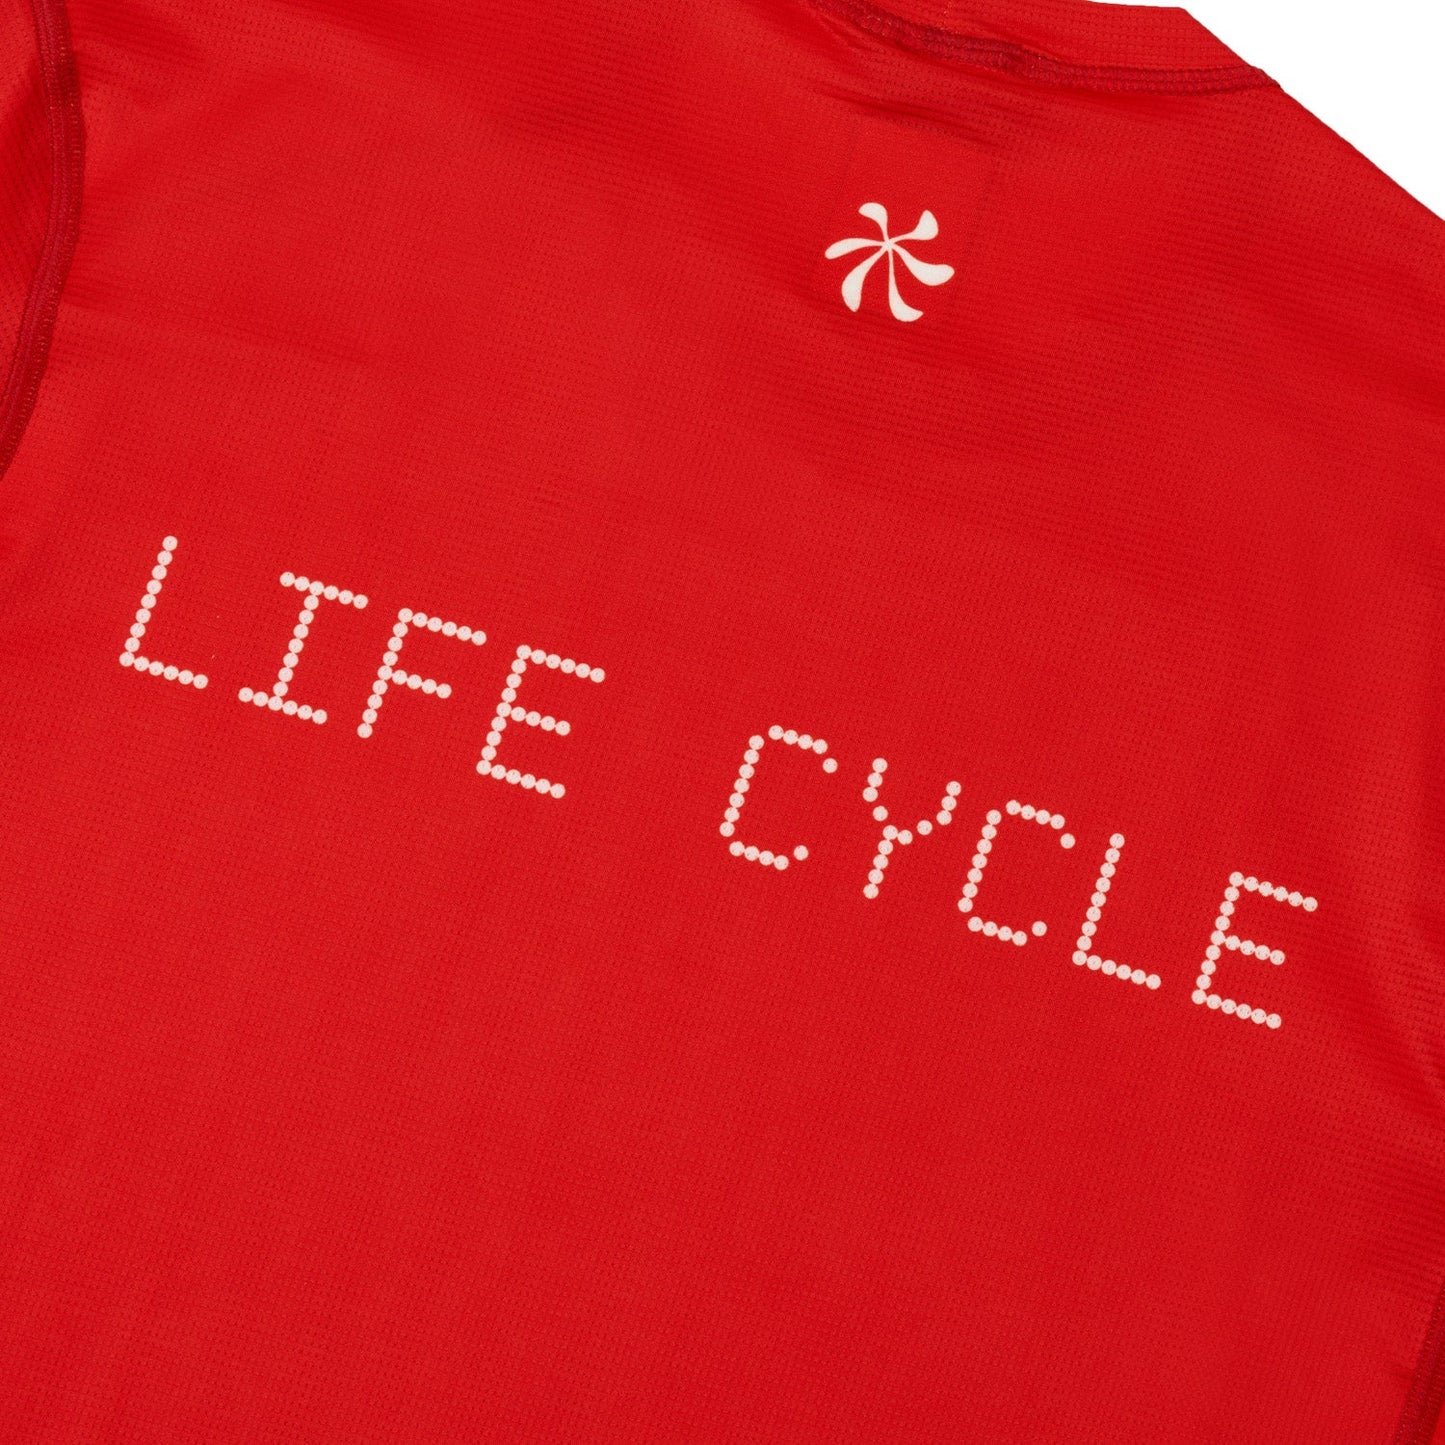 Nomadic Tech Short Sleeve T Shirt Jersey - Life Cycle Red